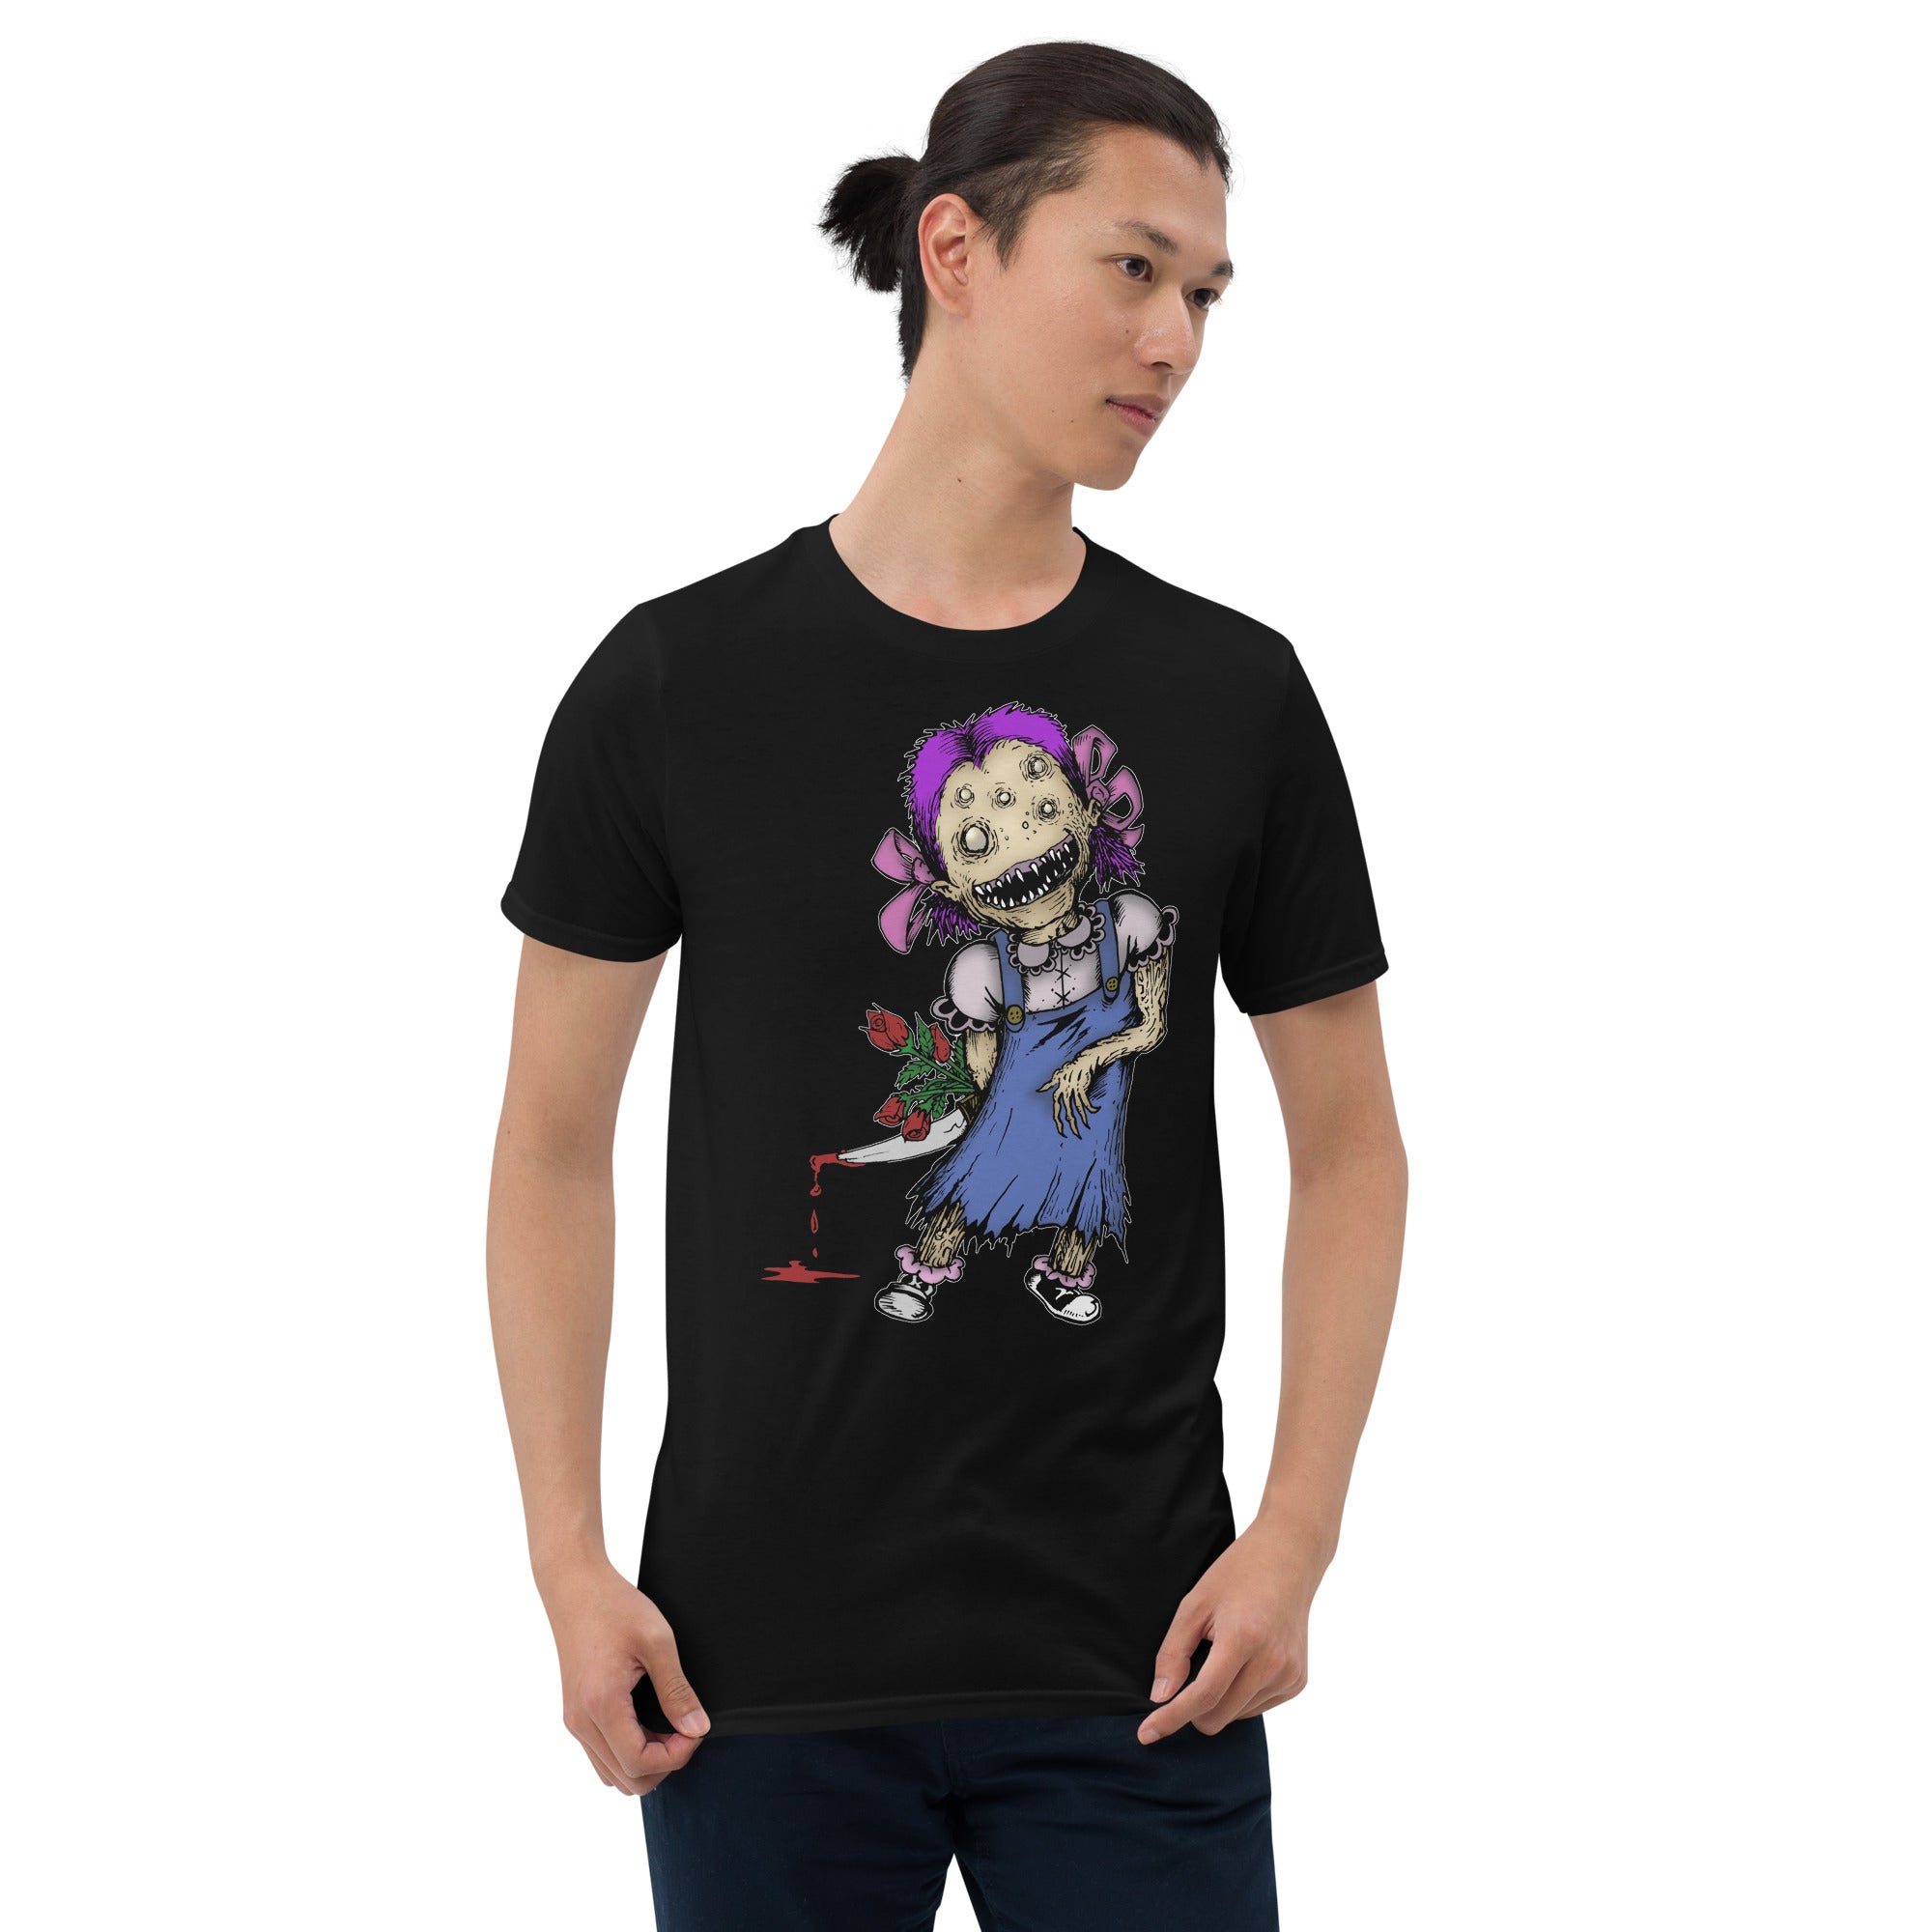 Wicked Little Girl with Bloody Knife Horror Style Men's Short Sleeve T-Shirt - Edge of Life Designs